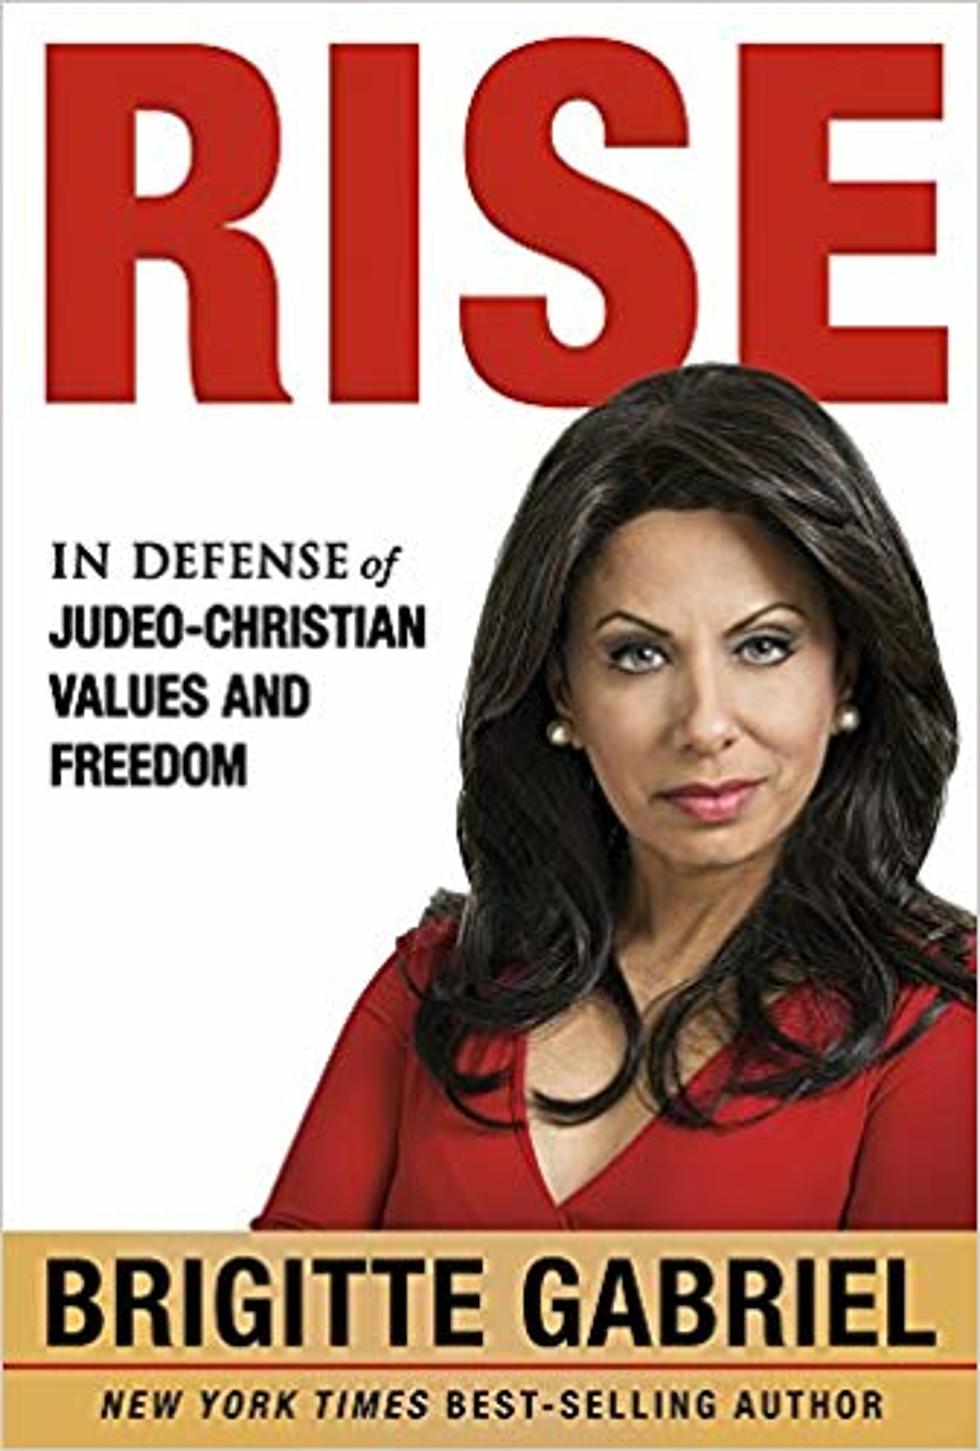 Brigitte Gabriel, New Book ‘RISE’ on 9/11 – Reveals Risks to Americans’ Very Way of Life. RISE